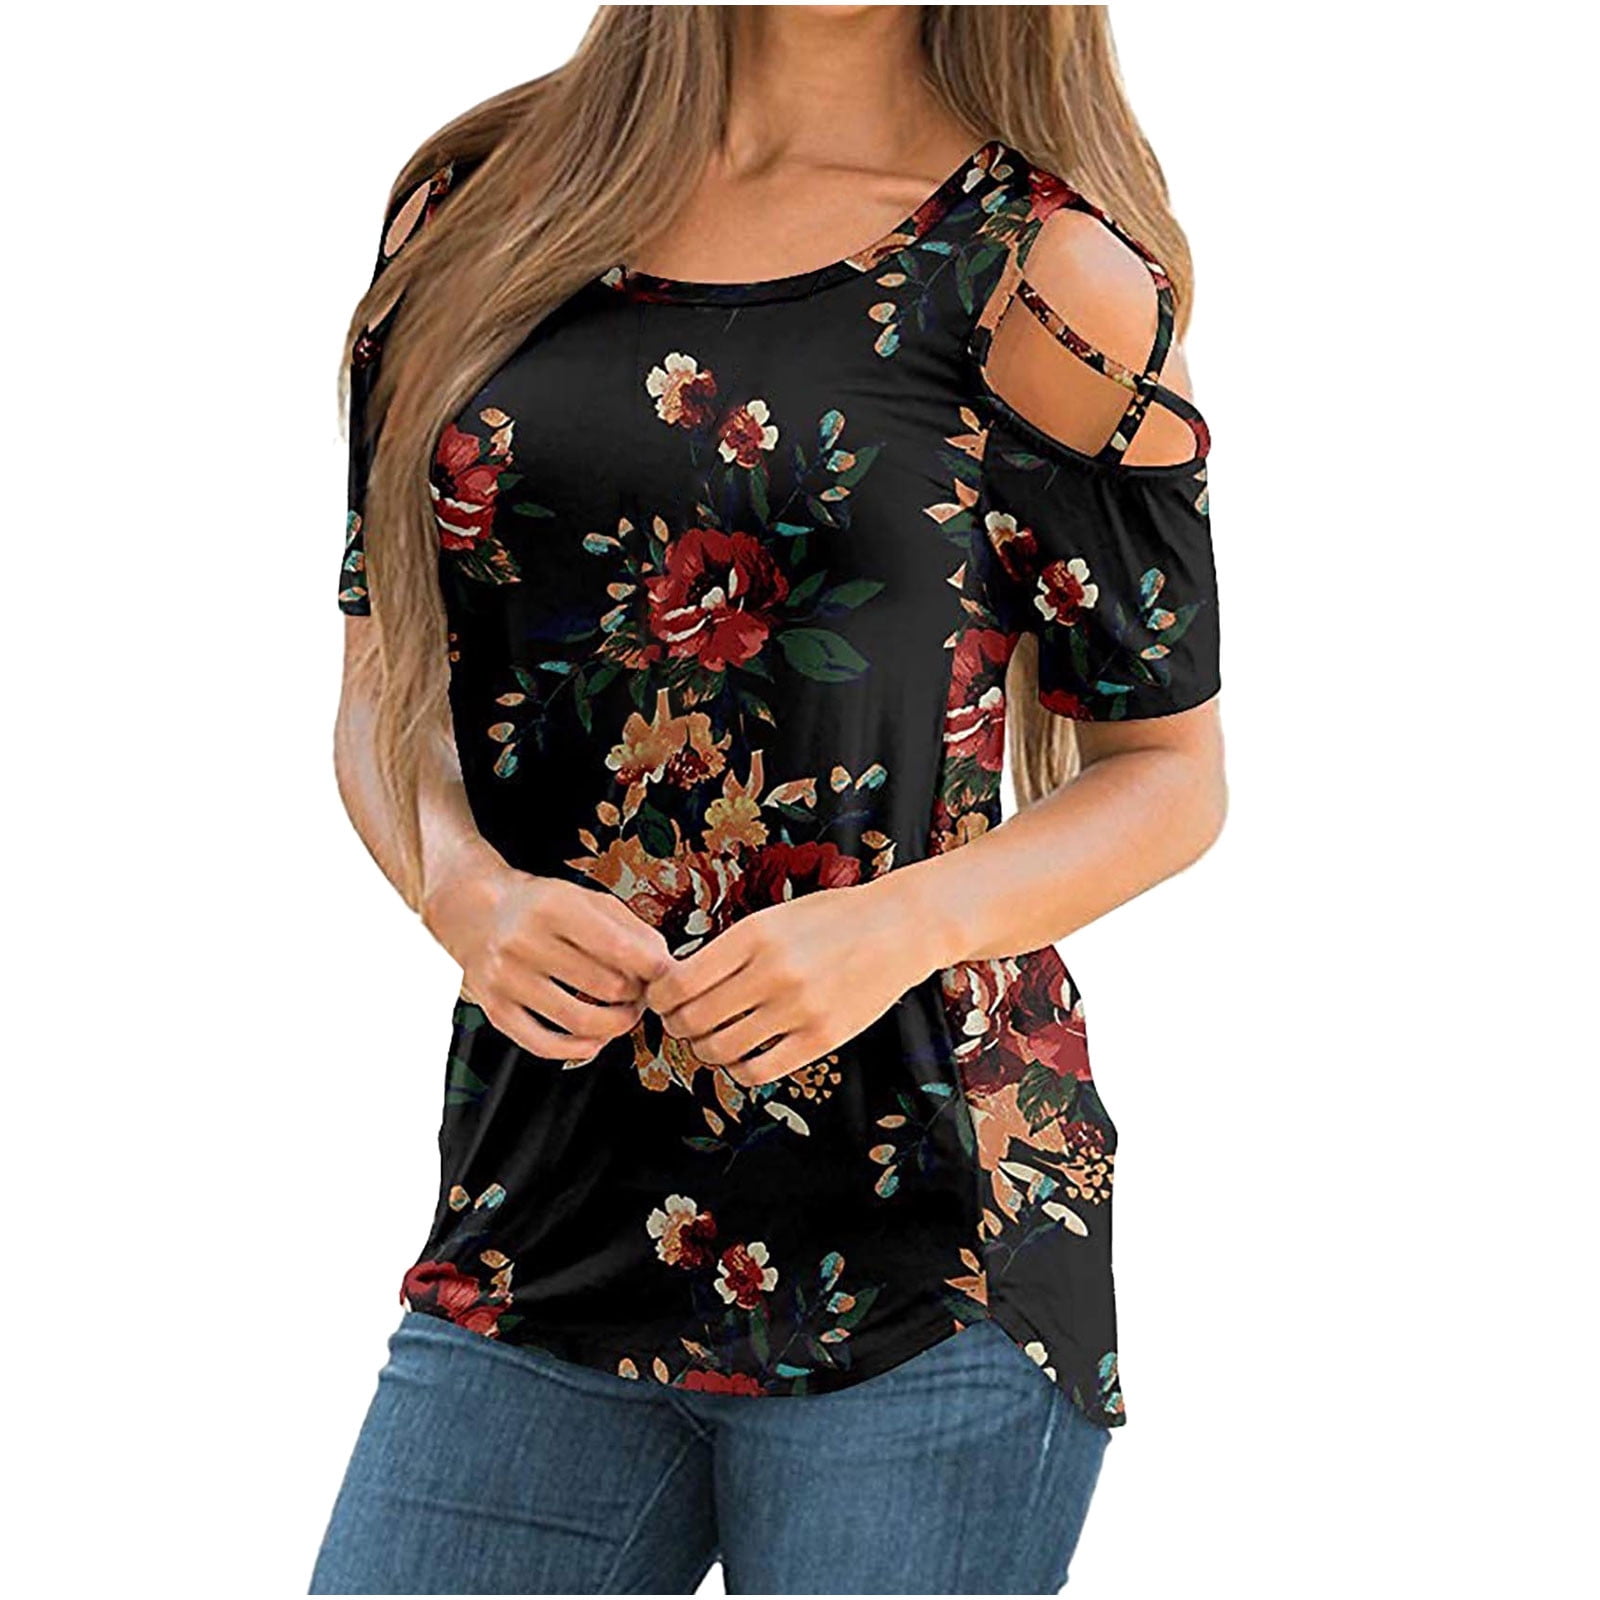 Womens Floral Summer Casual T-shirt Cold Shoulder Tee Tops Short Sleeve Blouse 